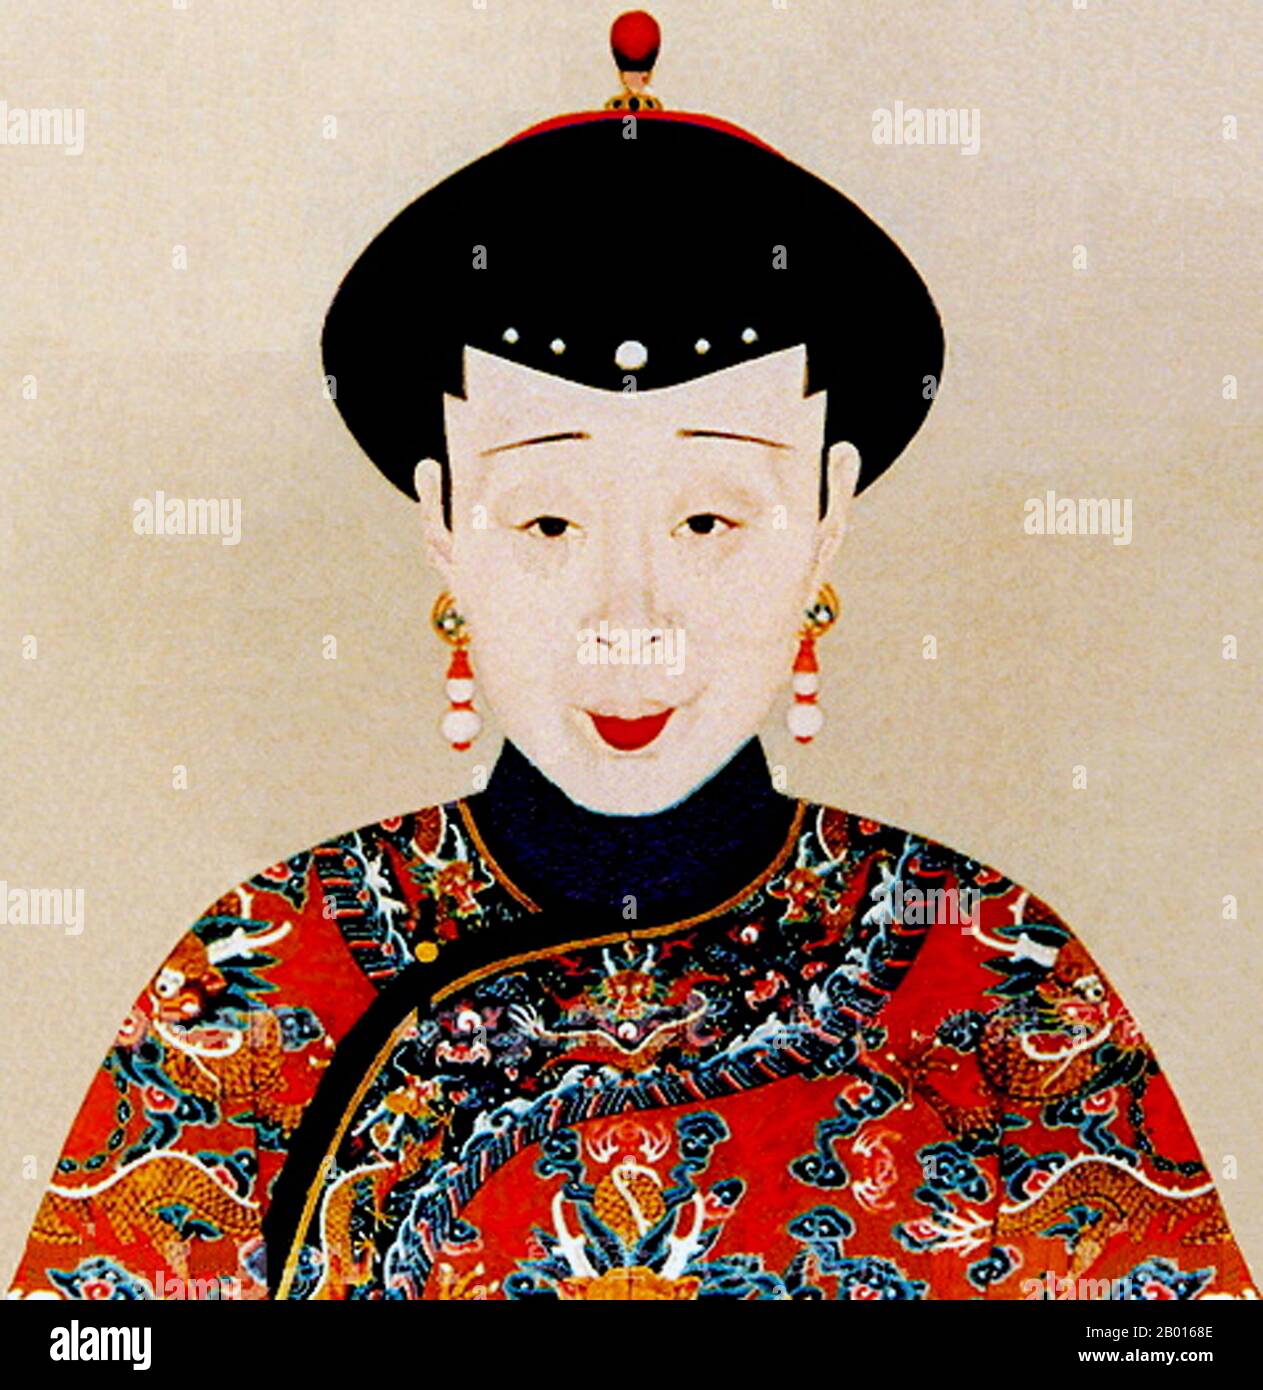 China: Consort He (- 18 May 1836), concubine of the Daoguang Emperor. Handscroll painting, early 19th century.  Consort He was a concubine and consort of the Daoguang Emperor. Hailing from the Manchu Plain White Banner Hoifa Nara clan, Lady Hoifa Nara became a lady-in-waiting for Prince Minning, the future Daoguang Emperor, some time under the reign of the Jiaqing Emperor. Minning became the Daoguang Emperor in 1820, and she was granted the title of 'Concubine He' in 1822 before later being elevated to 'Consort He' in 1823. She died in 1836 due to kidney problems. Stock Photo